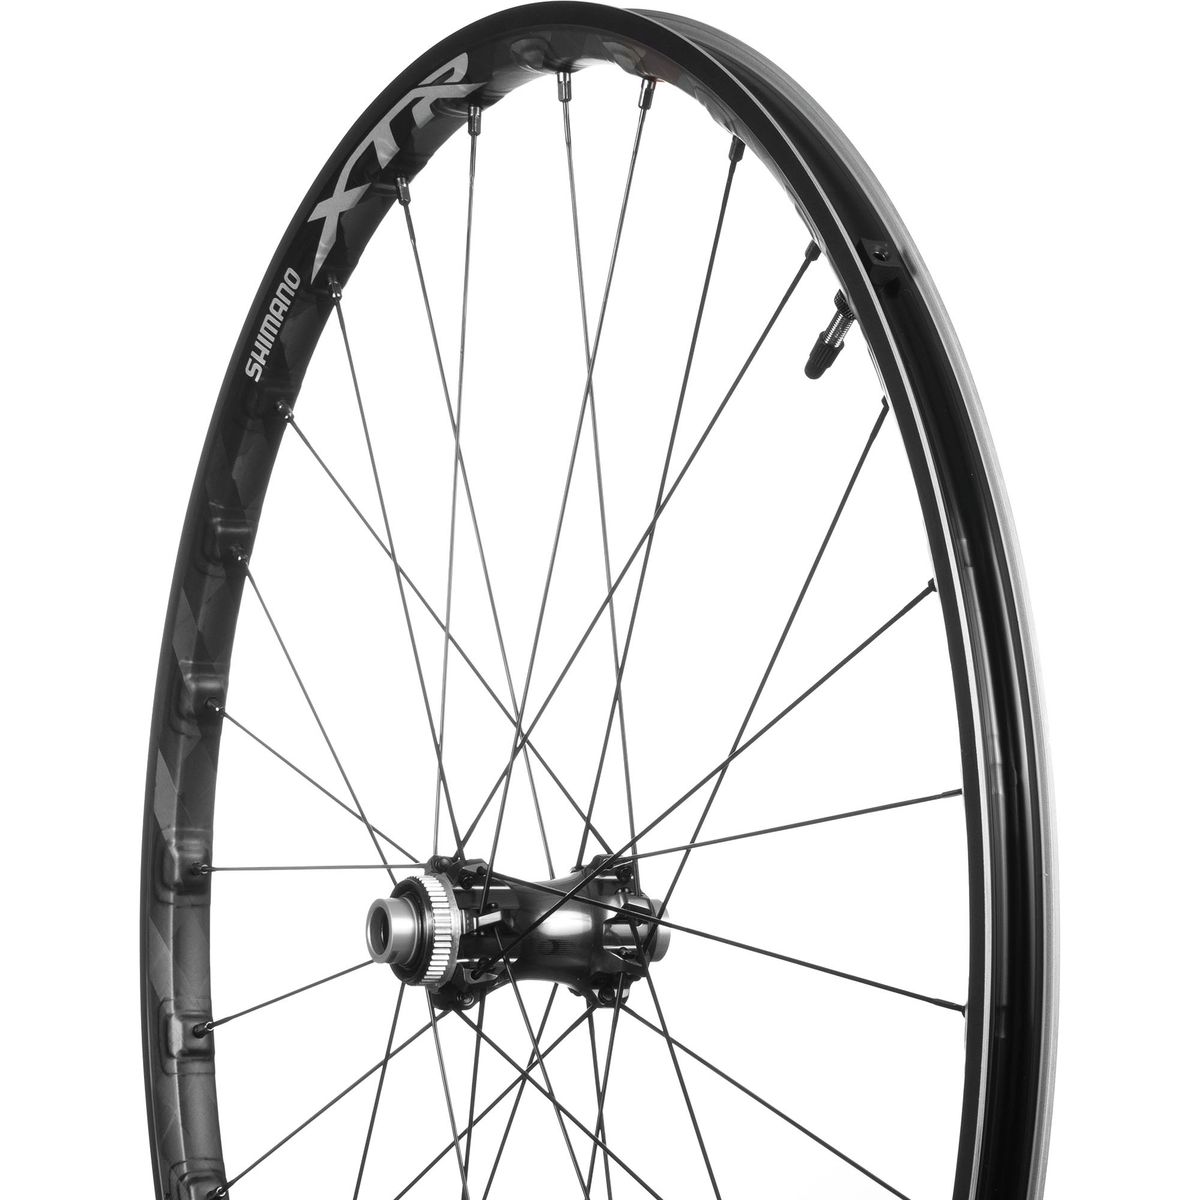 Shimano XTR WH M9000 TL 275in Wheelset